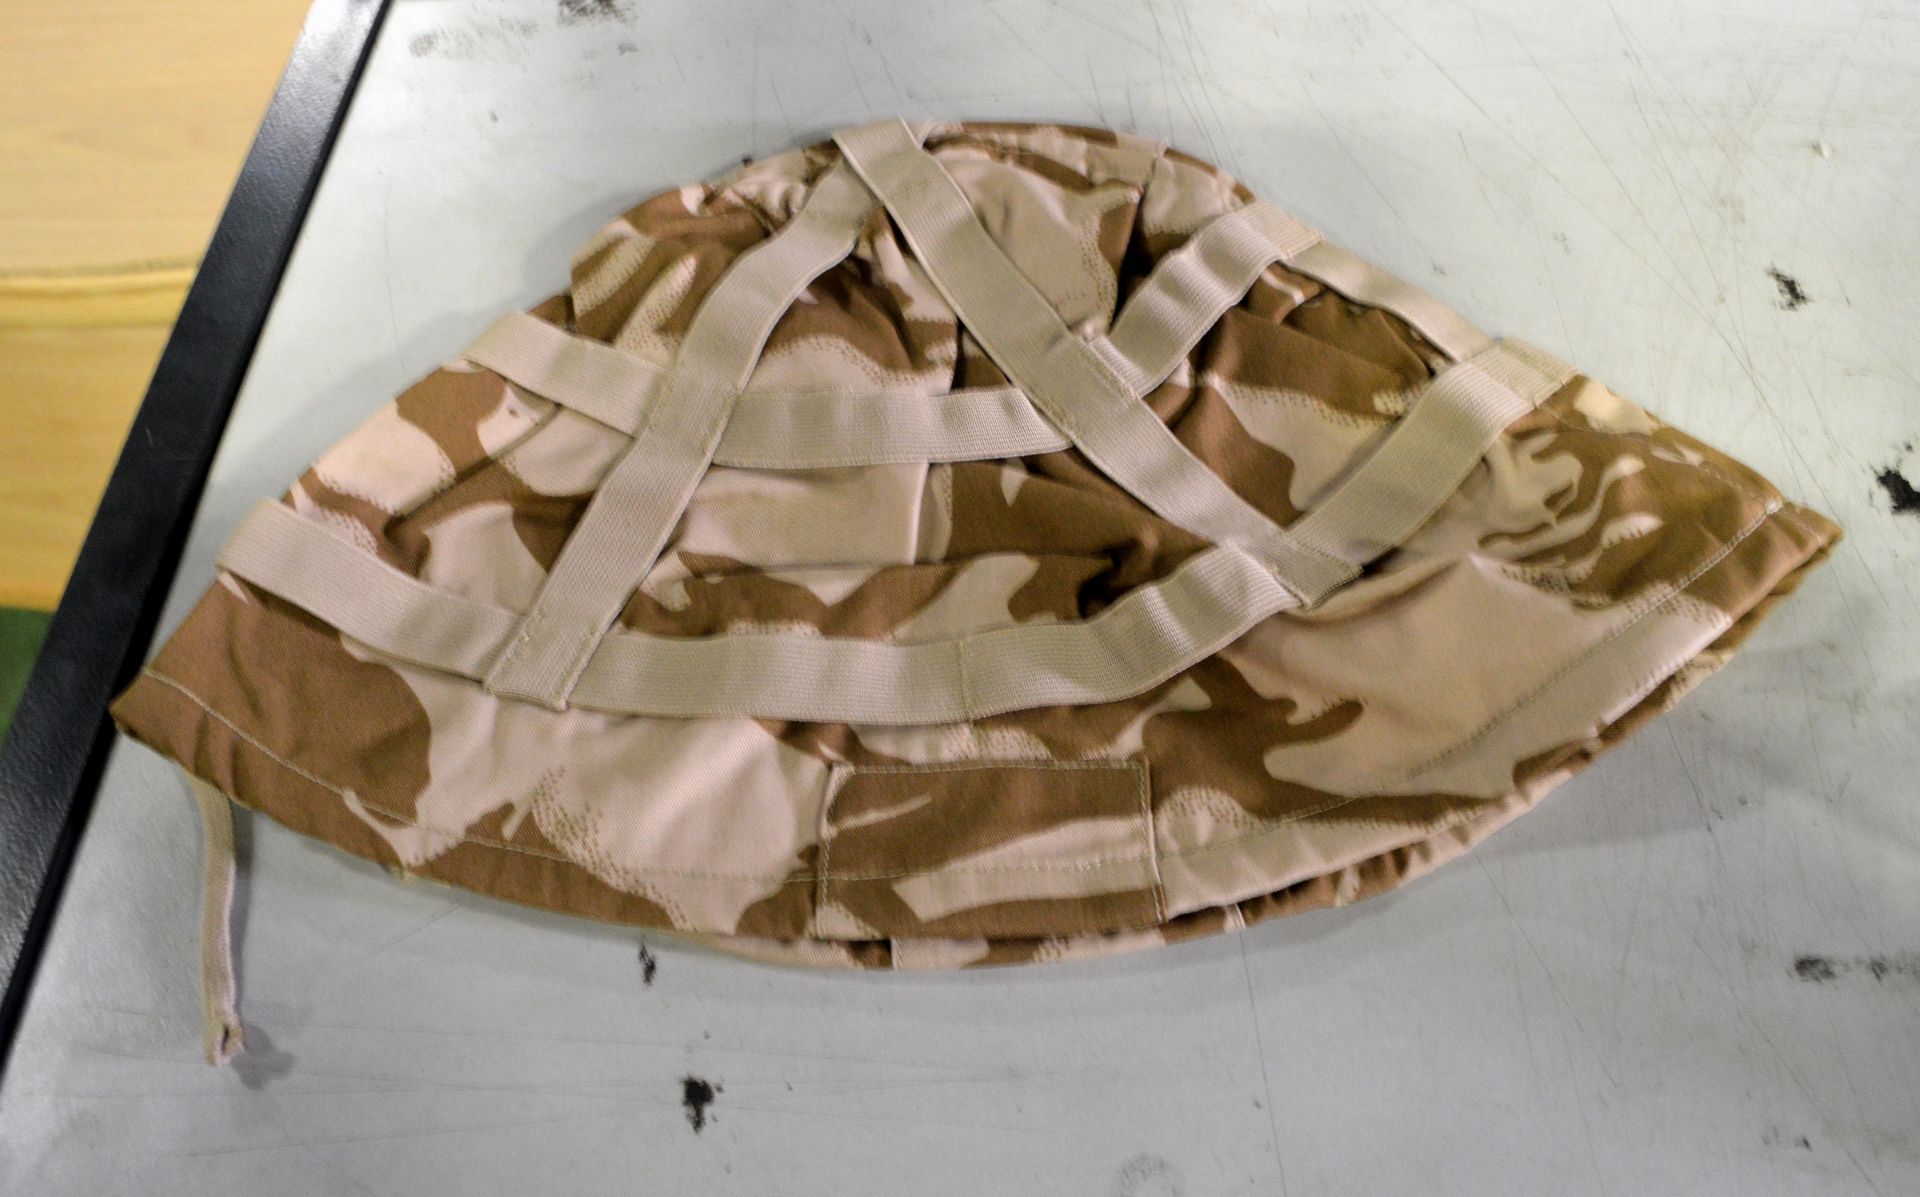 Desert Camouflage Patterned Helmet Covers (approx. 80) - Image 3 of 3